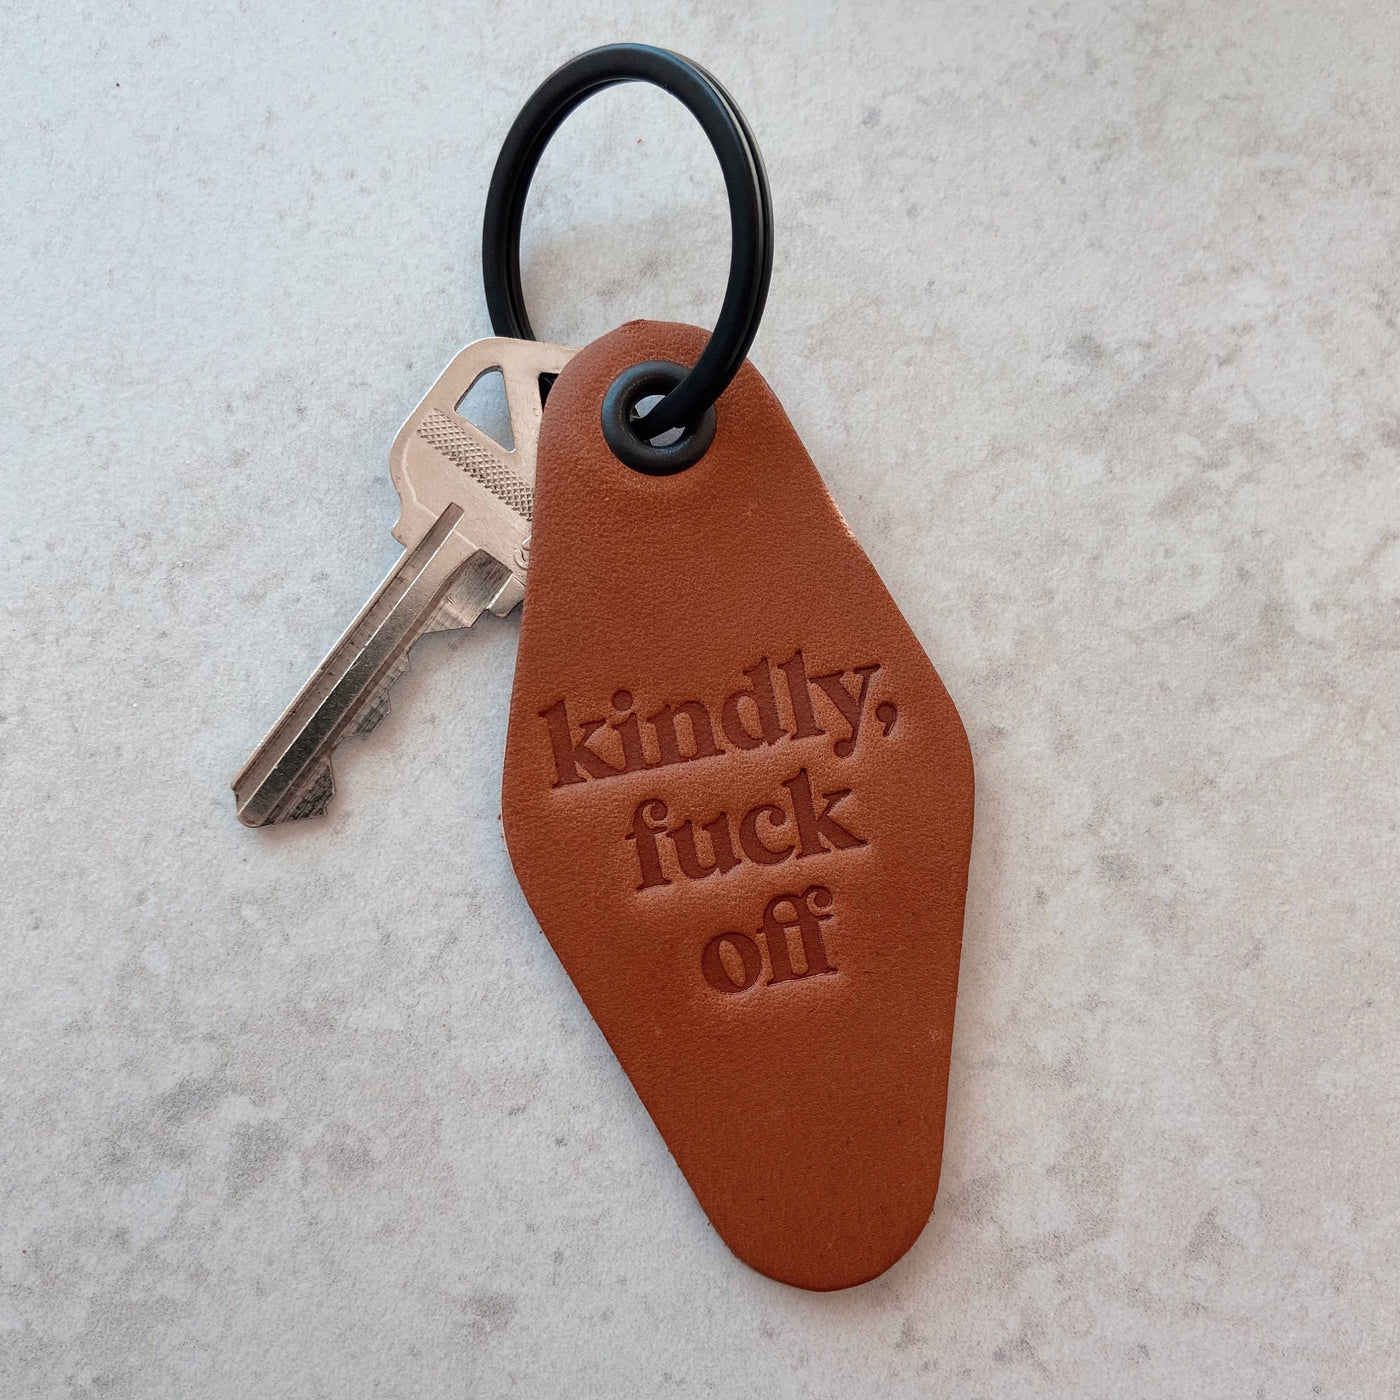 Kindly Fuck Off Leather Motel Keychain